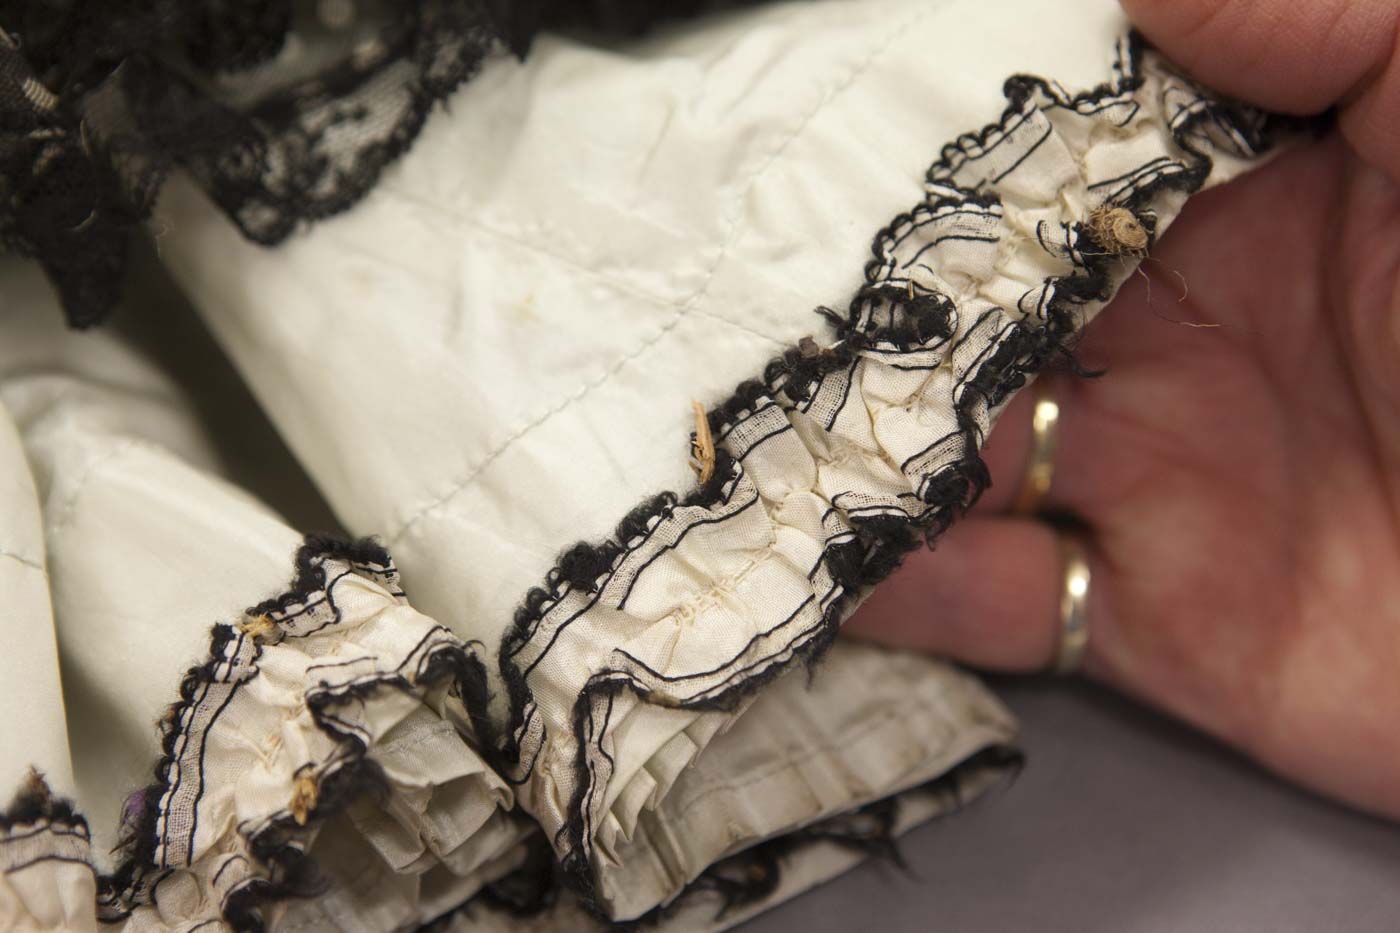 Conservator inspecting a burr in the hemline. - click to view larger image